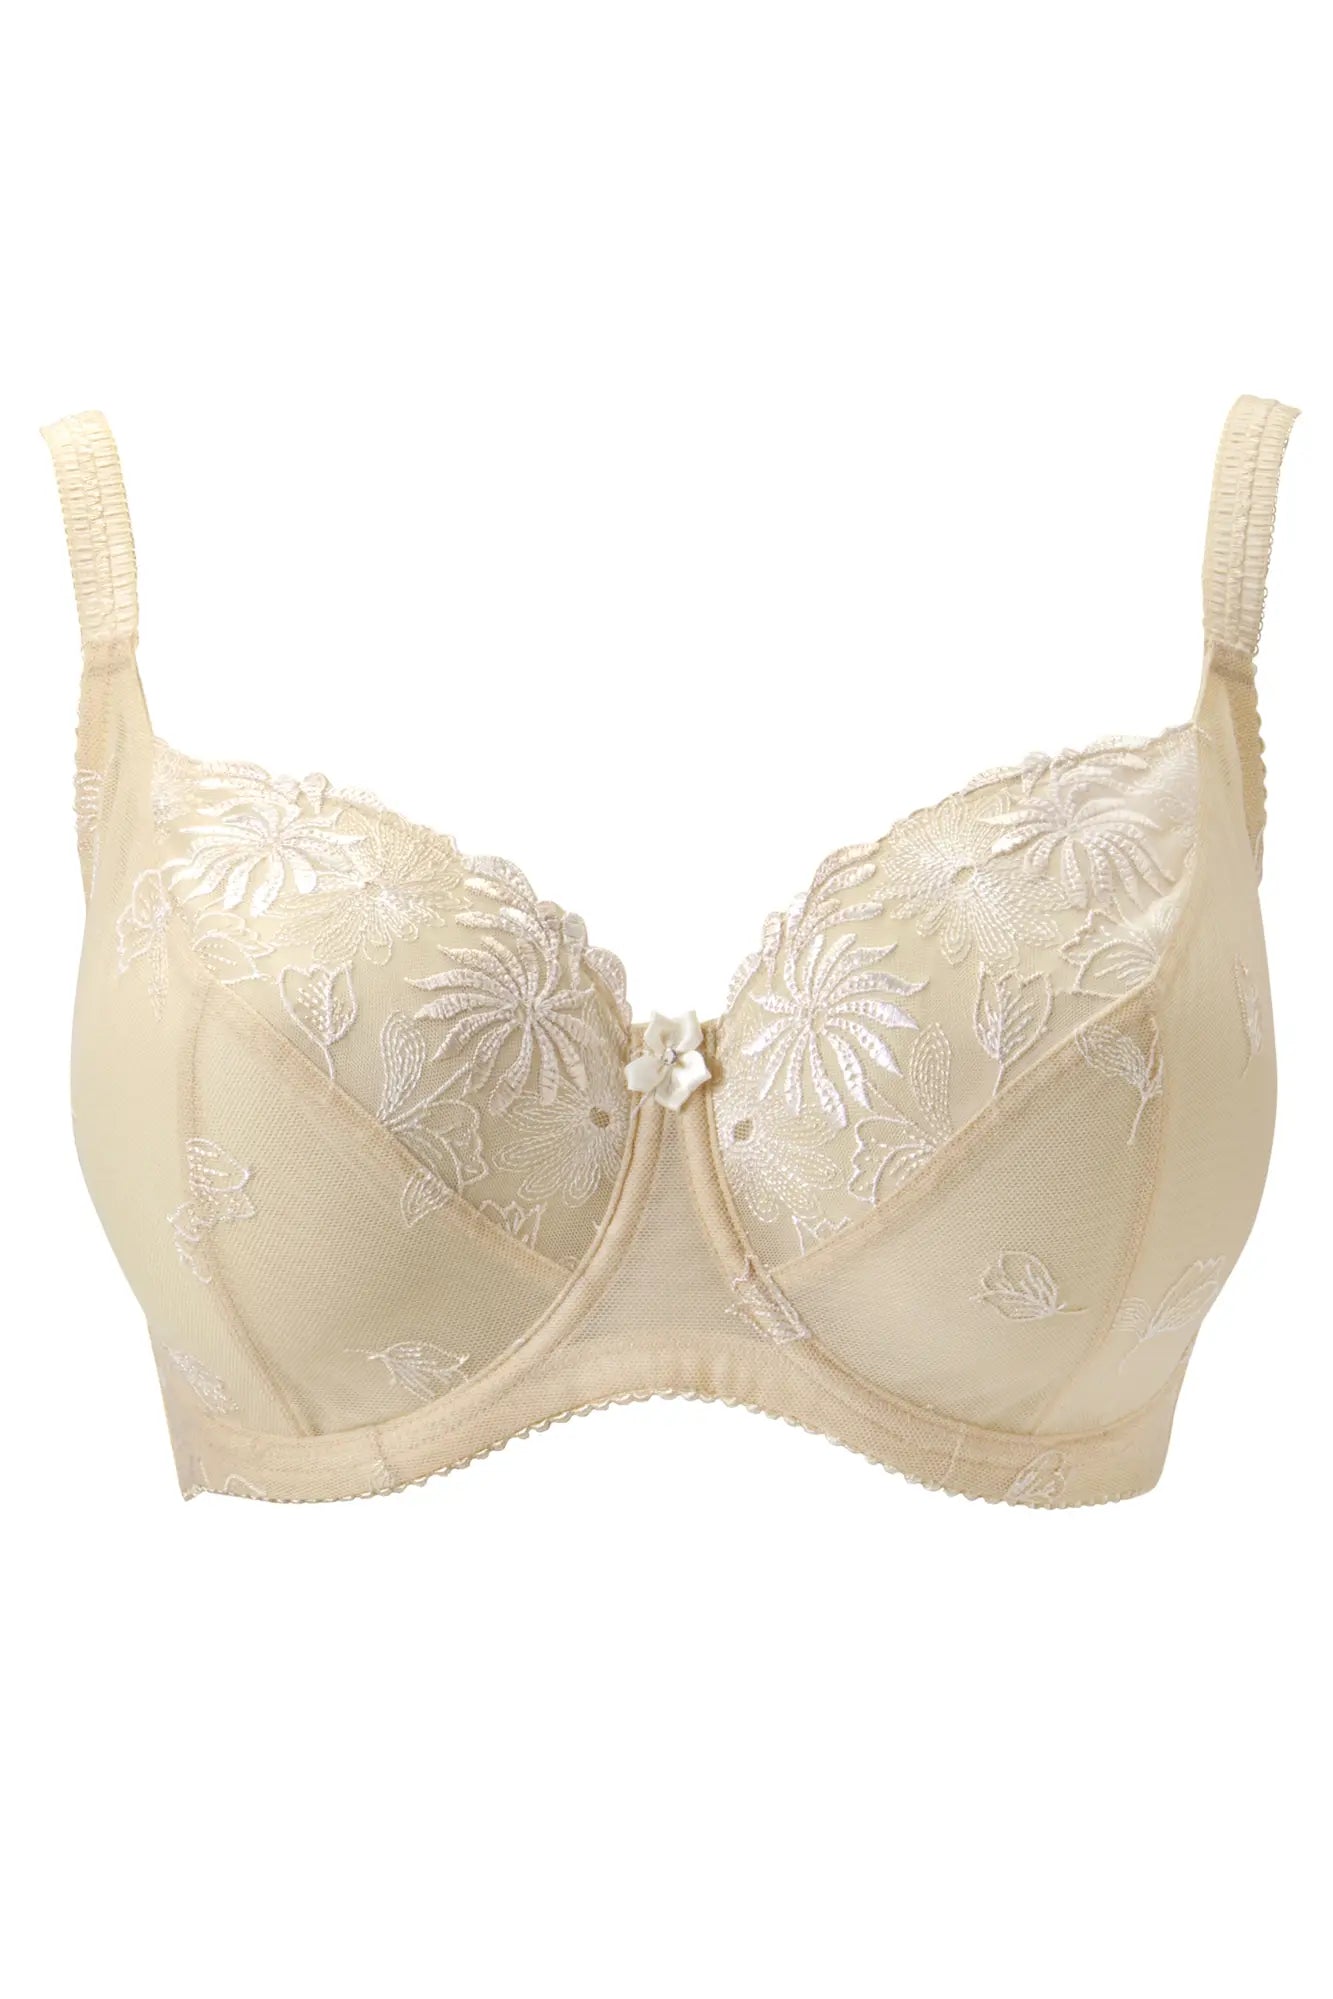 St. Tropez Full Cup Bra in Ivory Oyster - Pour Moi – BraTopia